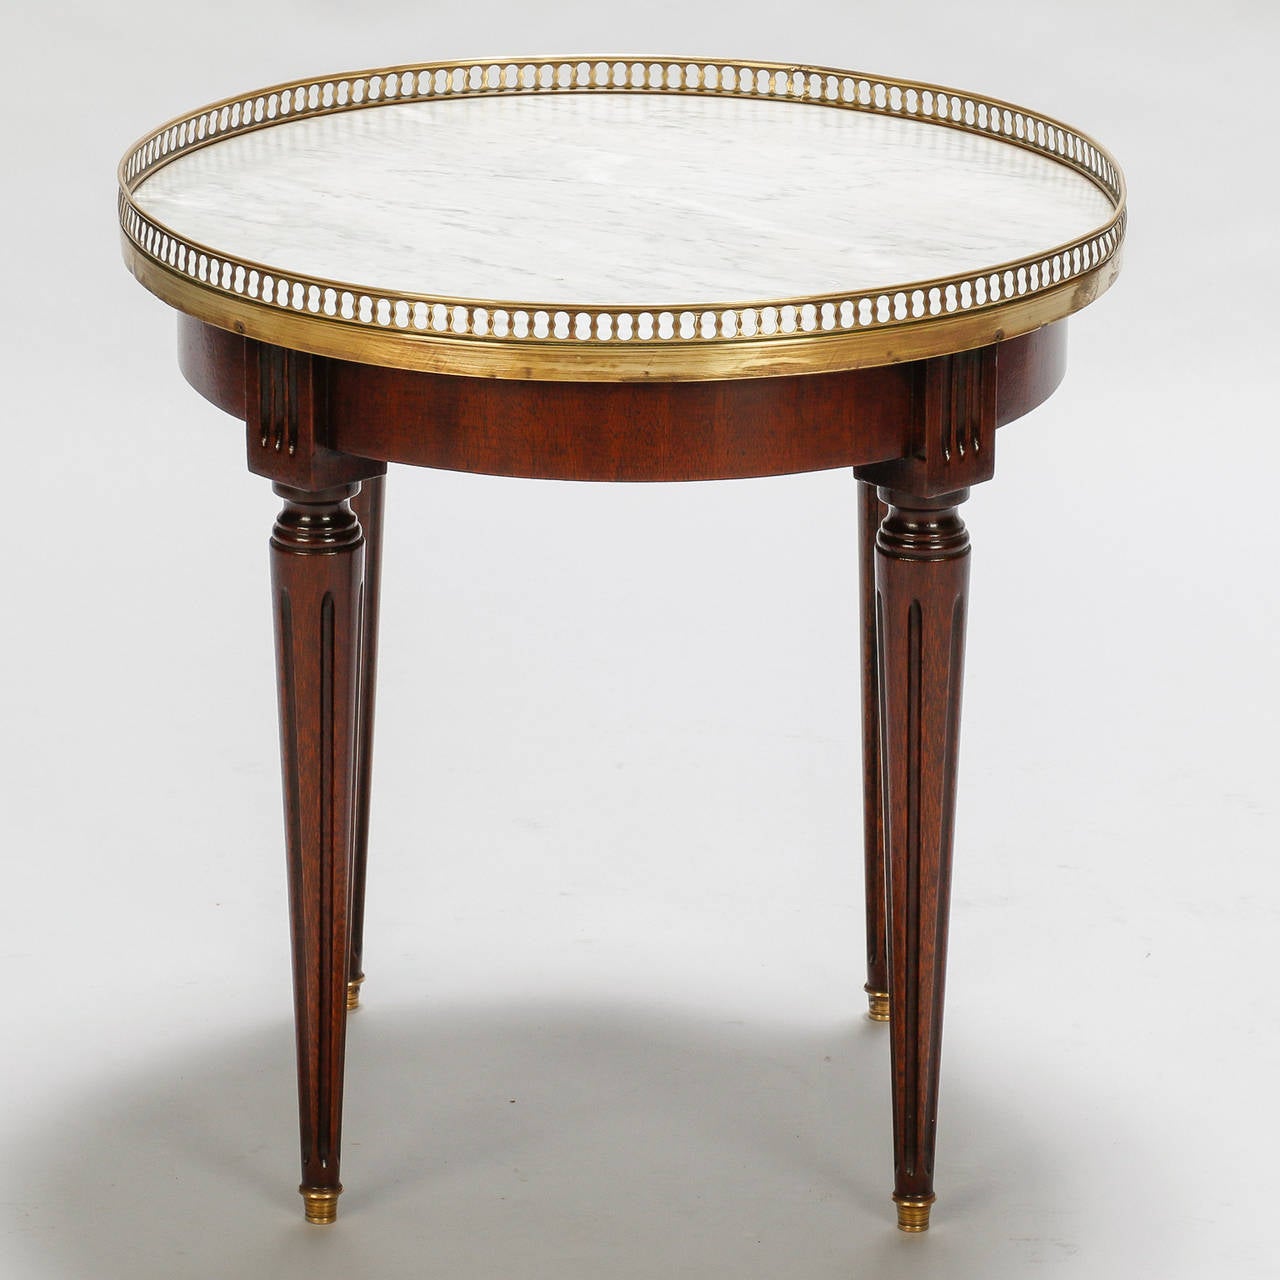 Circa 1920s small round European side table with reeded, tapered legs, a brass gallery and gray and white marble top.